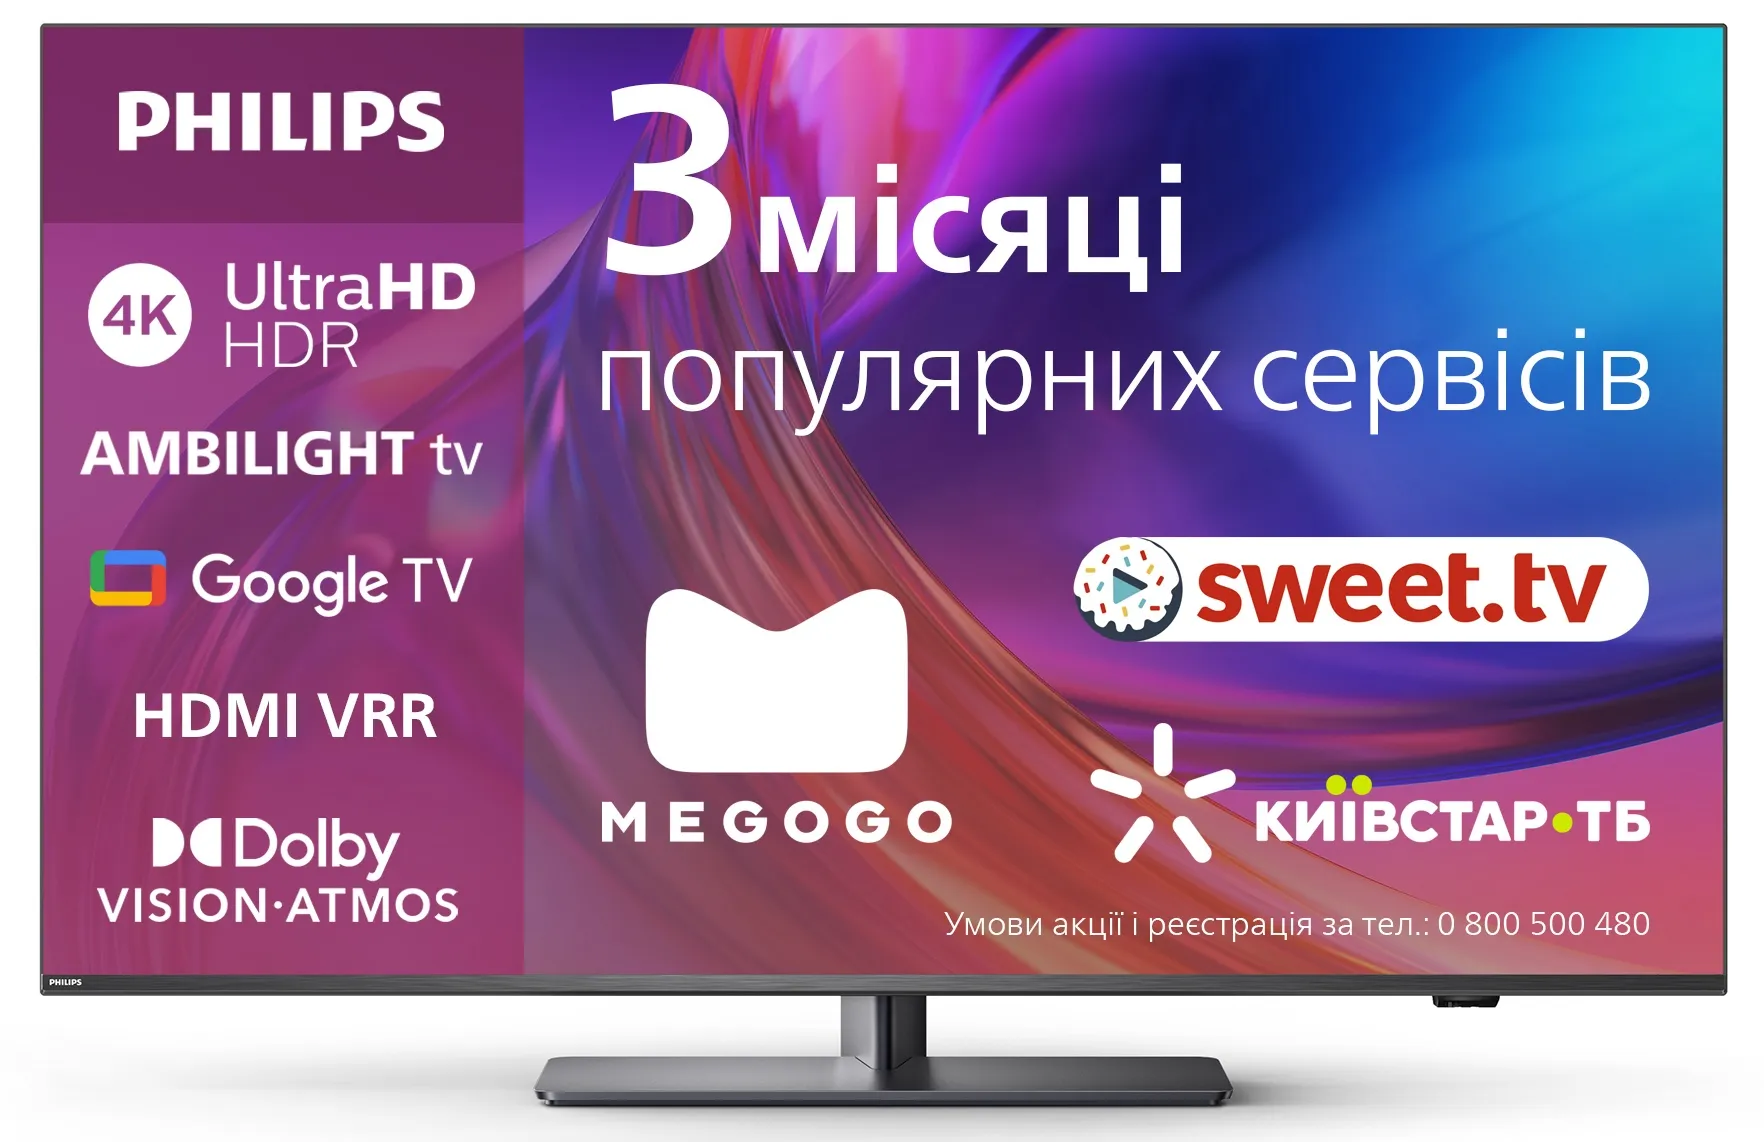 Philips The One 65PUS8818 TV Ambilight 4K